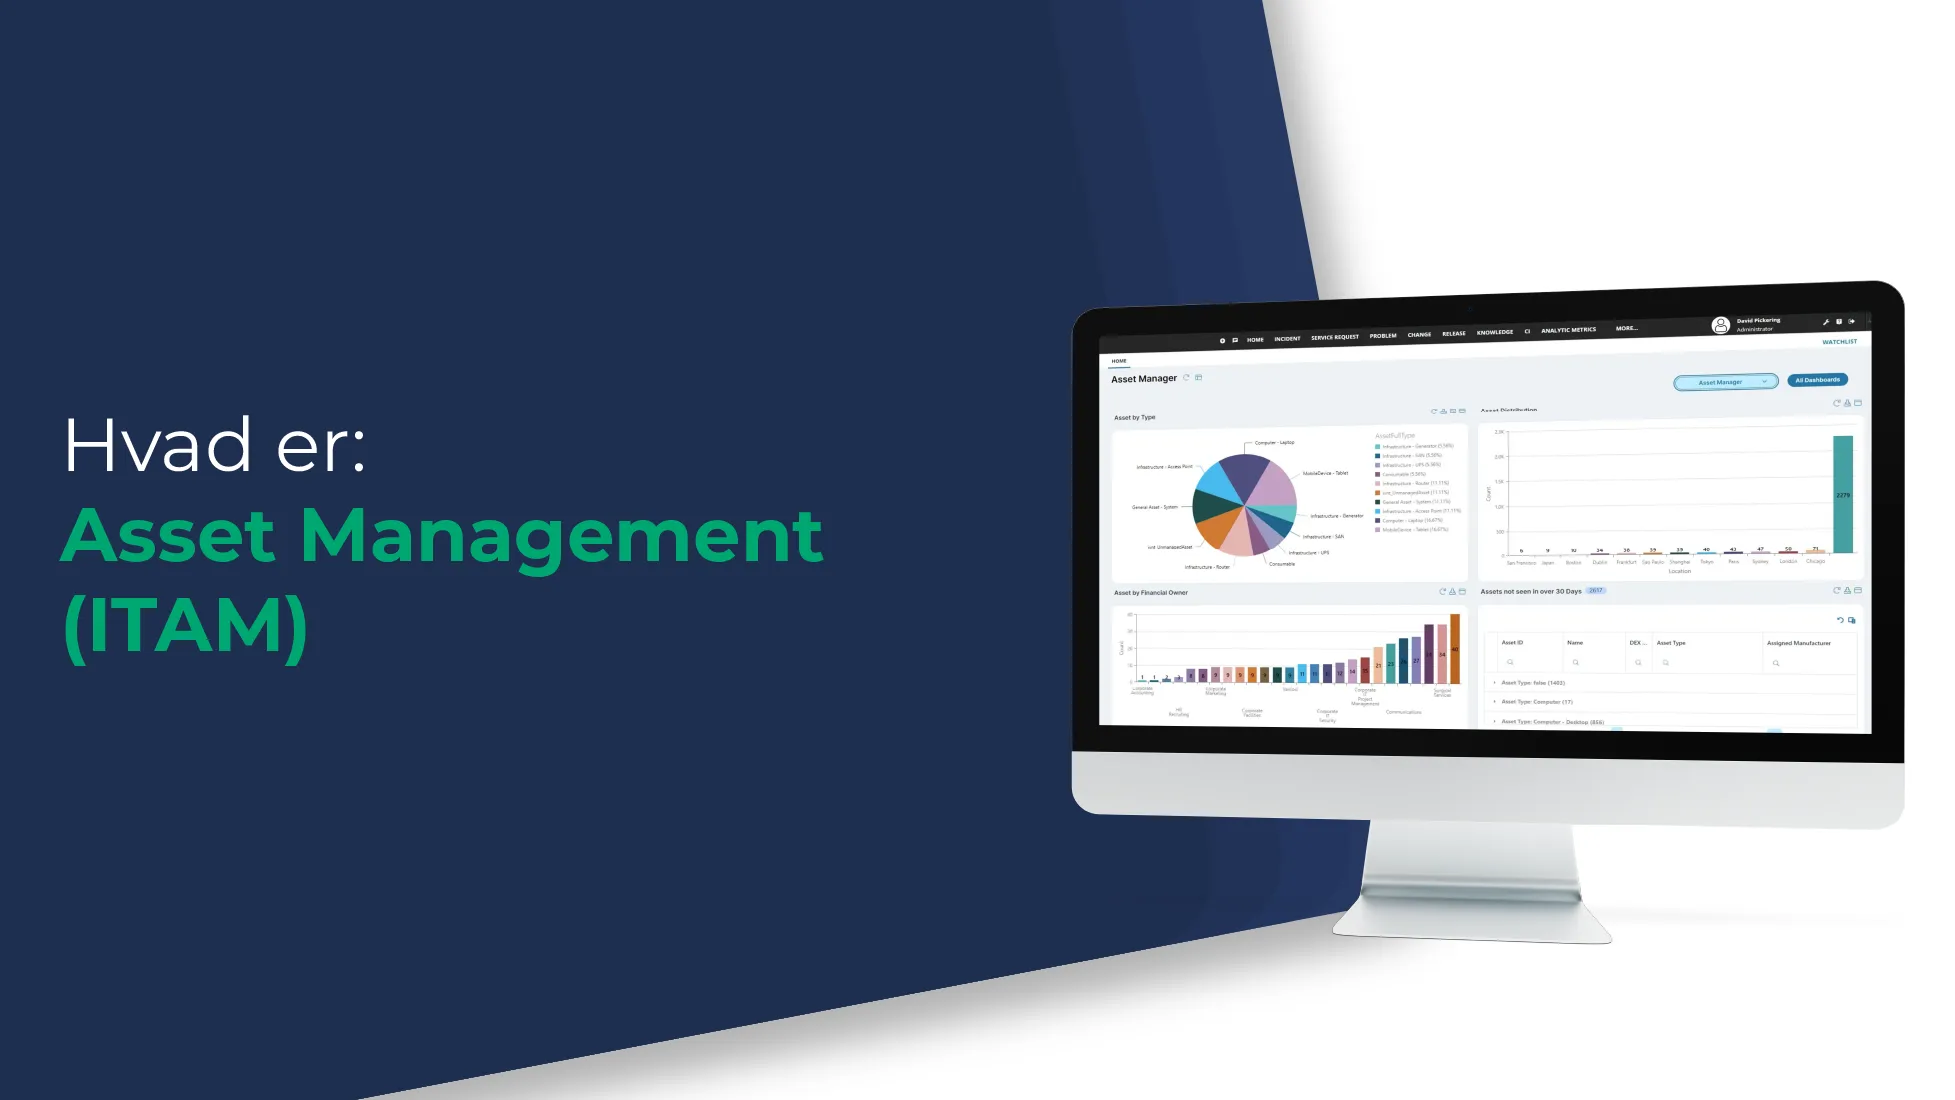 IT Asset Management is about following and managing all your IT assets in an organized and structured way.